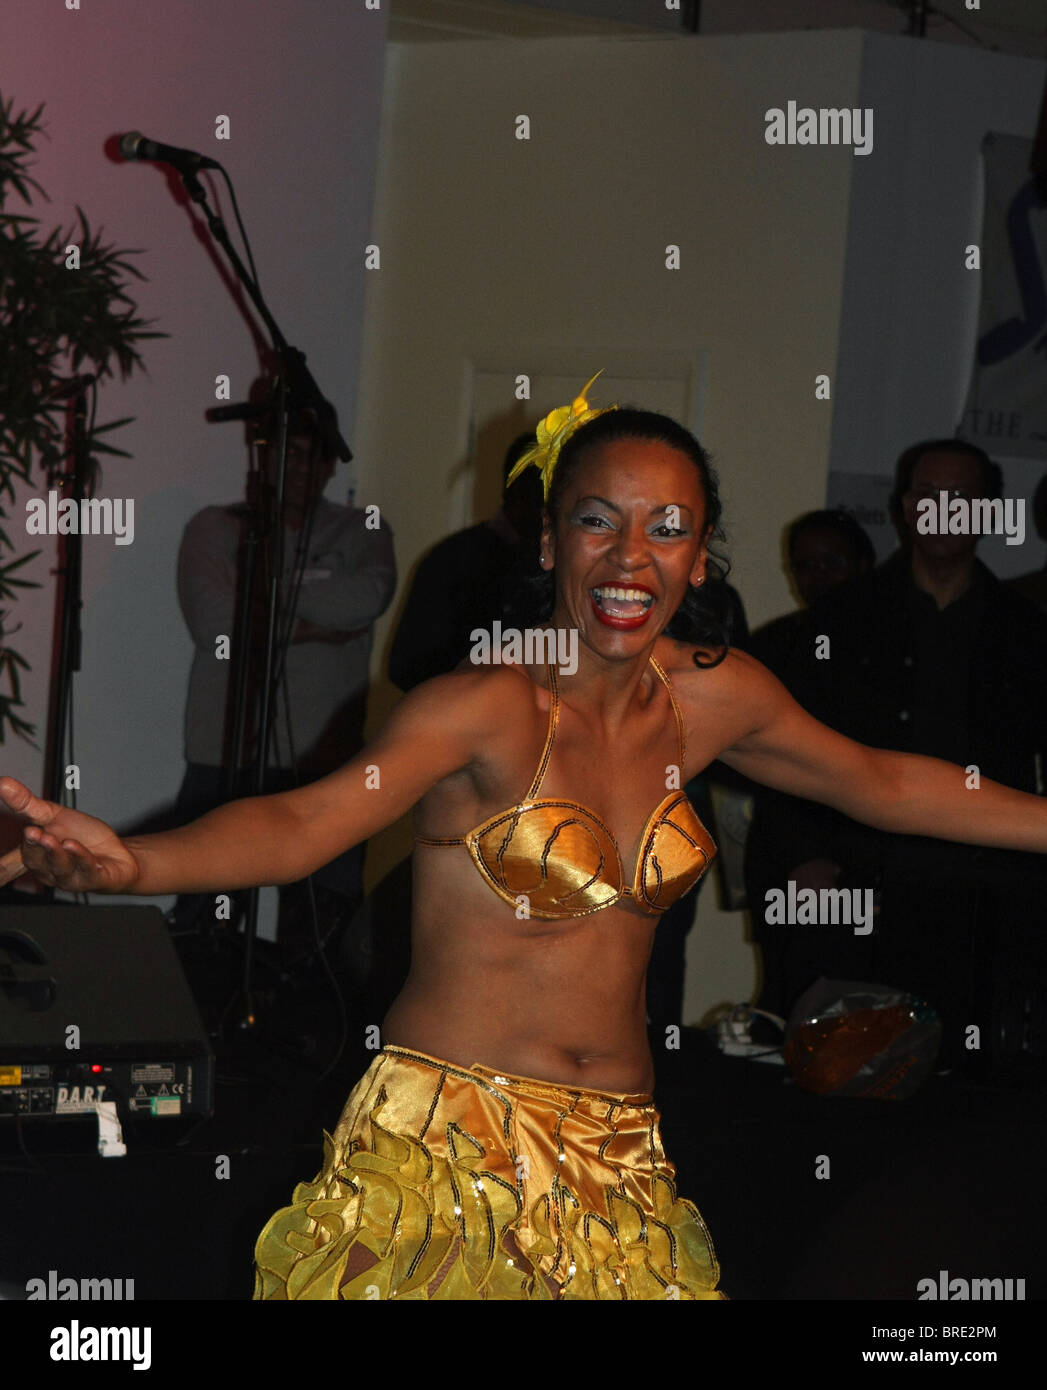 A girl in festival costume giving a lesson in Cuban dancing at a Rum and Rhythm festival at Vinopolis, London Bridge, London Stock Photo